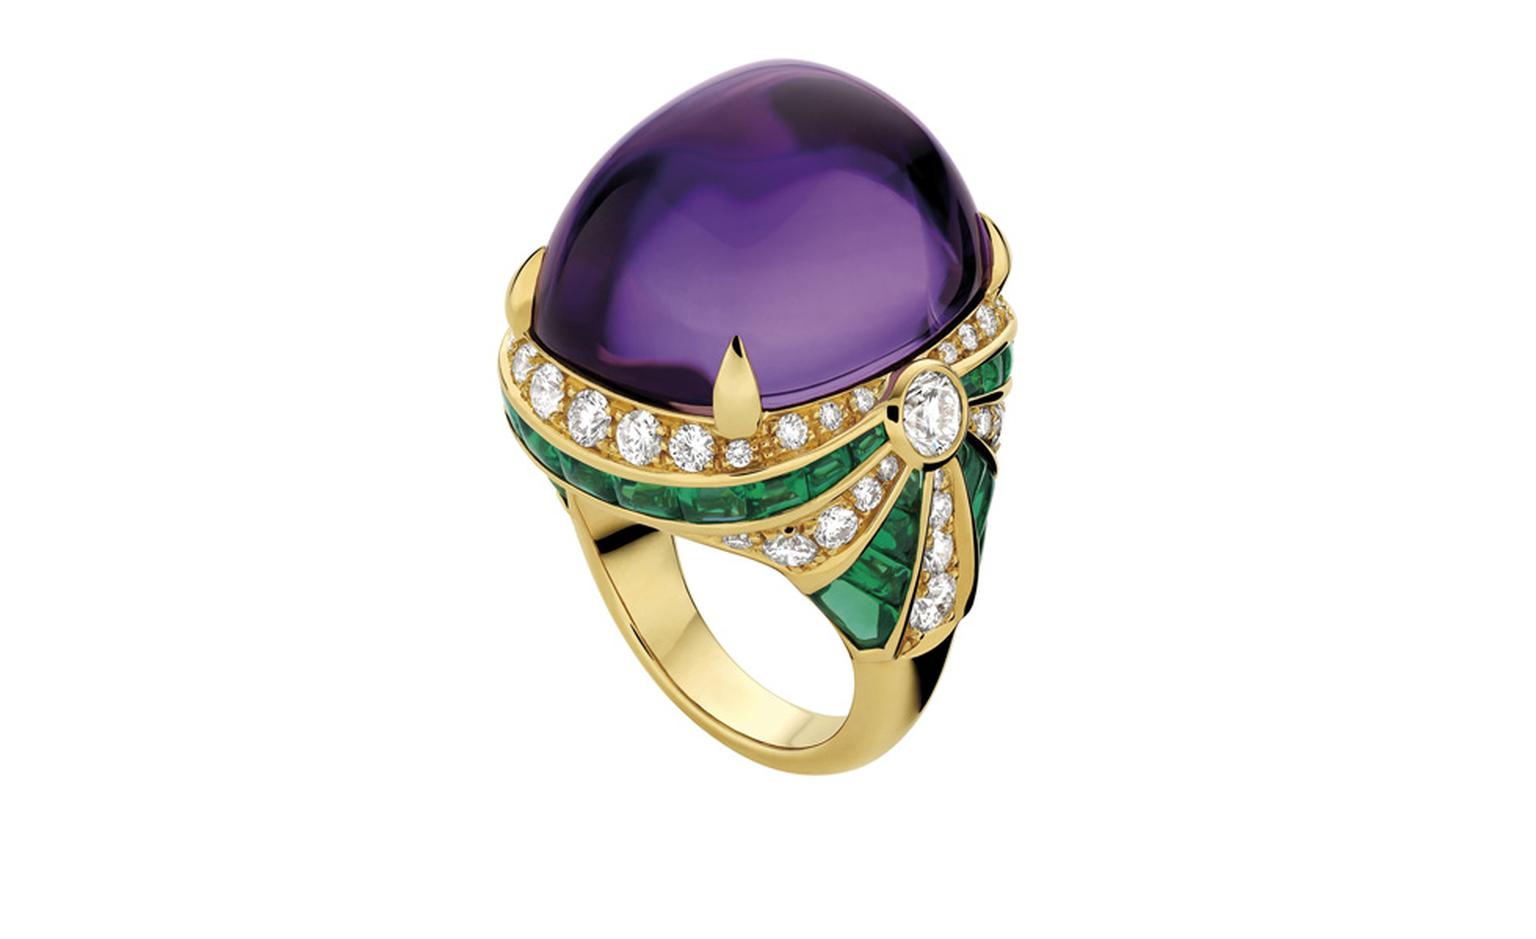 Bulgari. High Jewellery ring in yellow gold with 1 cabochon amethyst, 38 calibrated cabochon emeralds, 2 round brilliant cut diamonds and pave´ diamonds. POA.